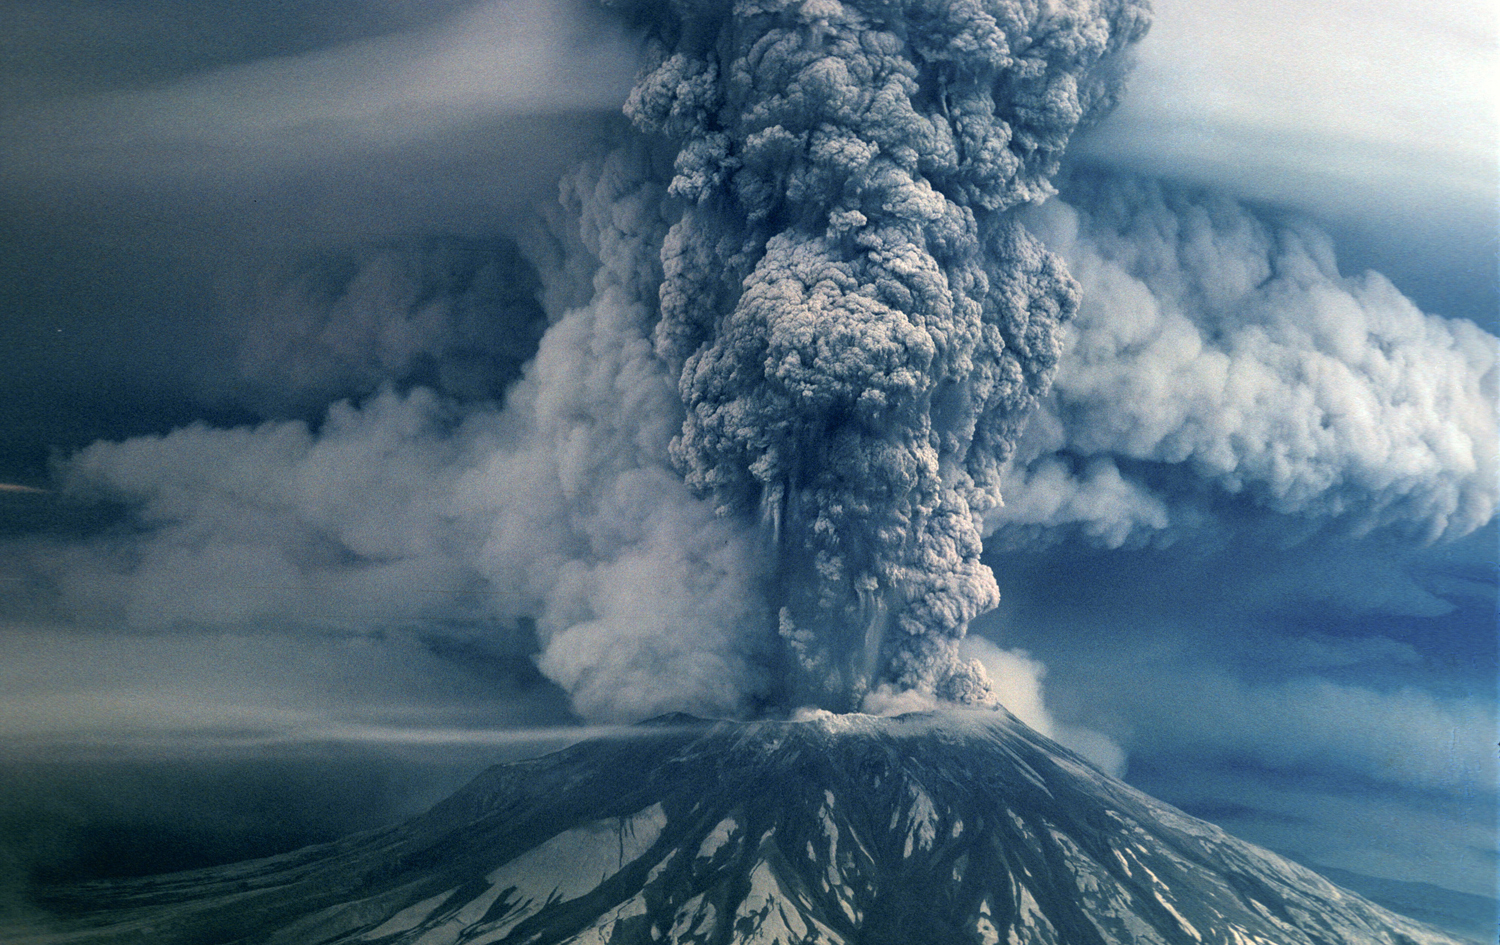 A riveting view of mount st helens